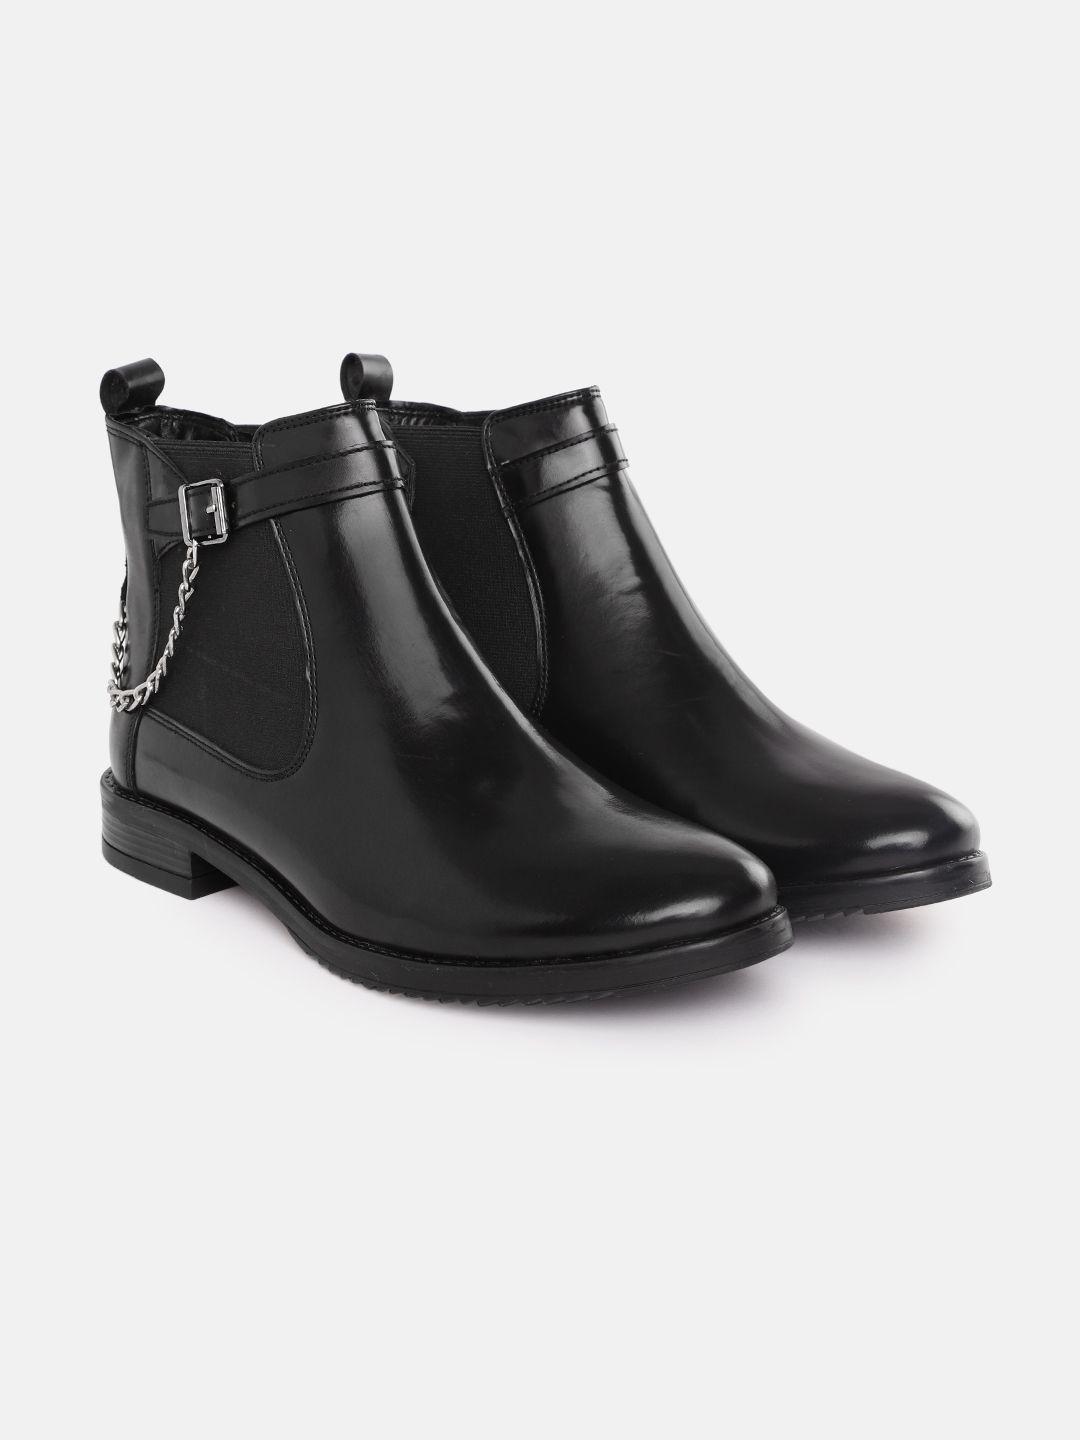 dressberry women mid-top chelsea boots with chain detail